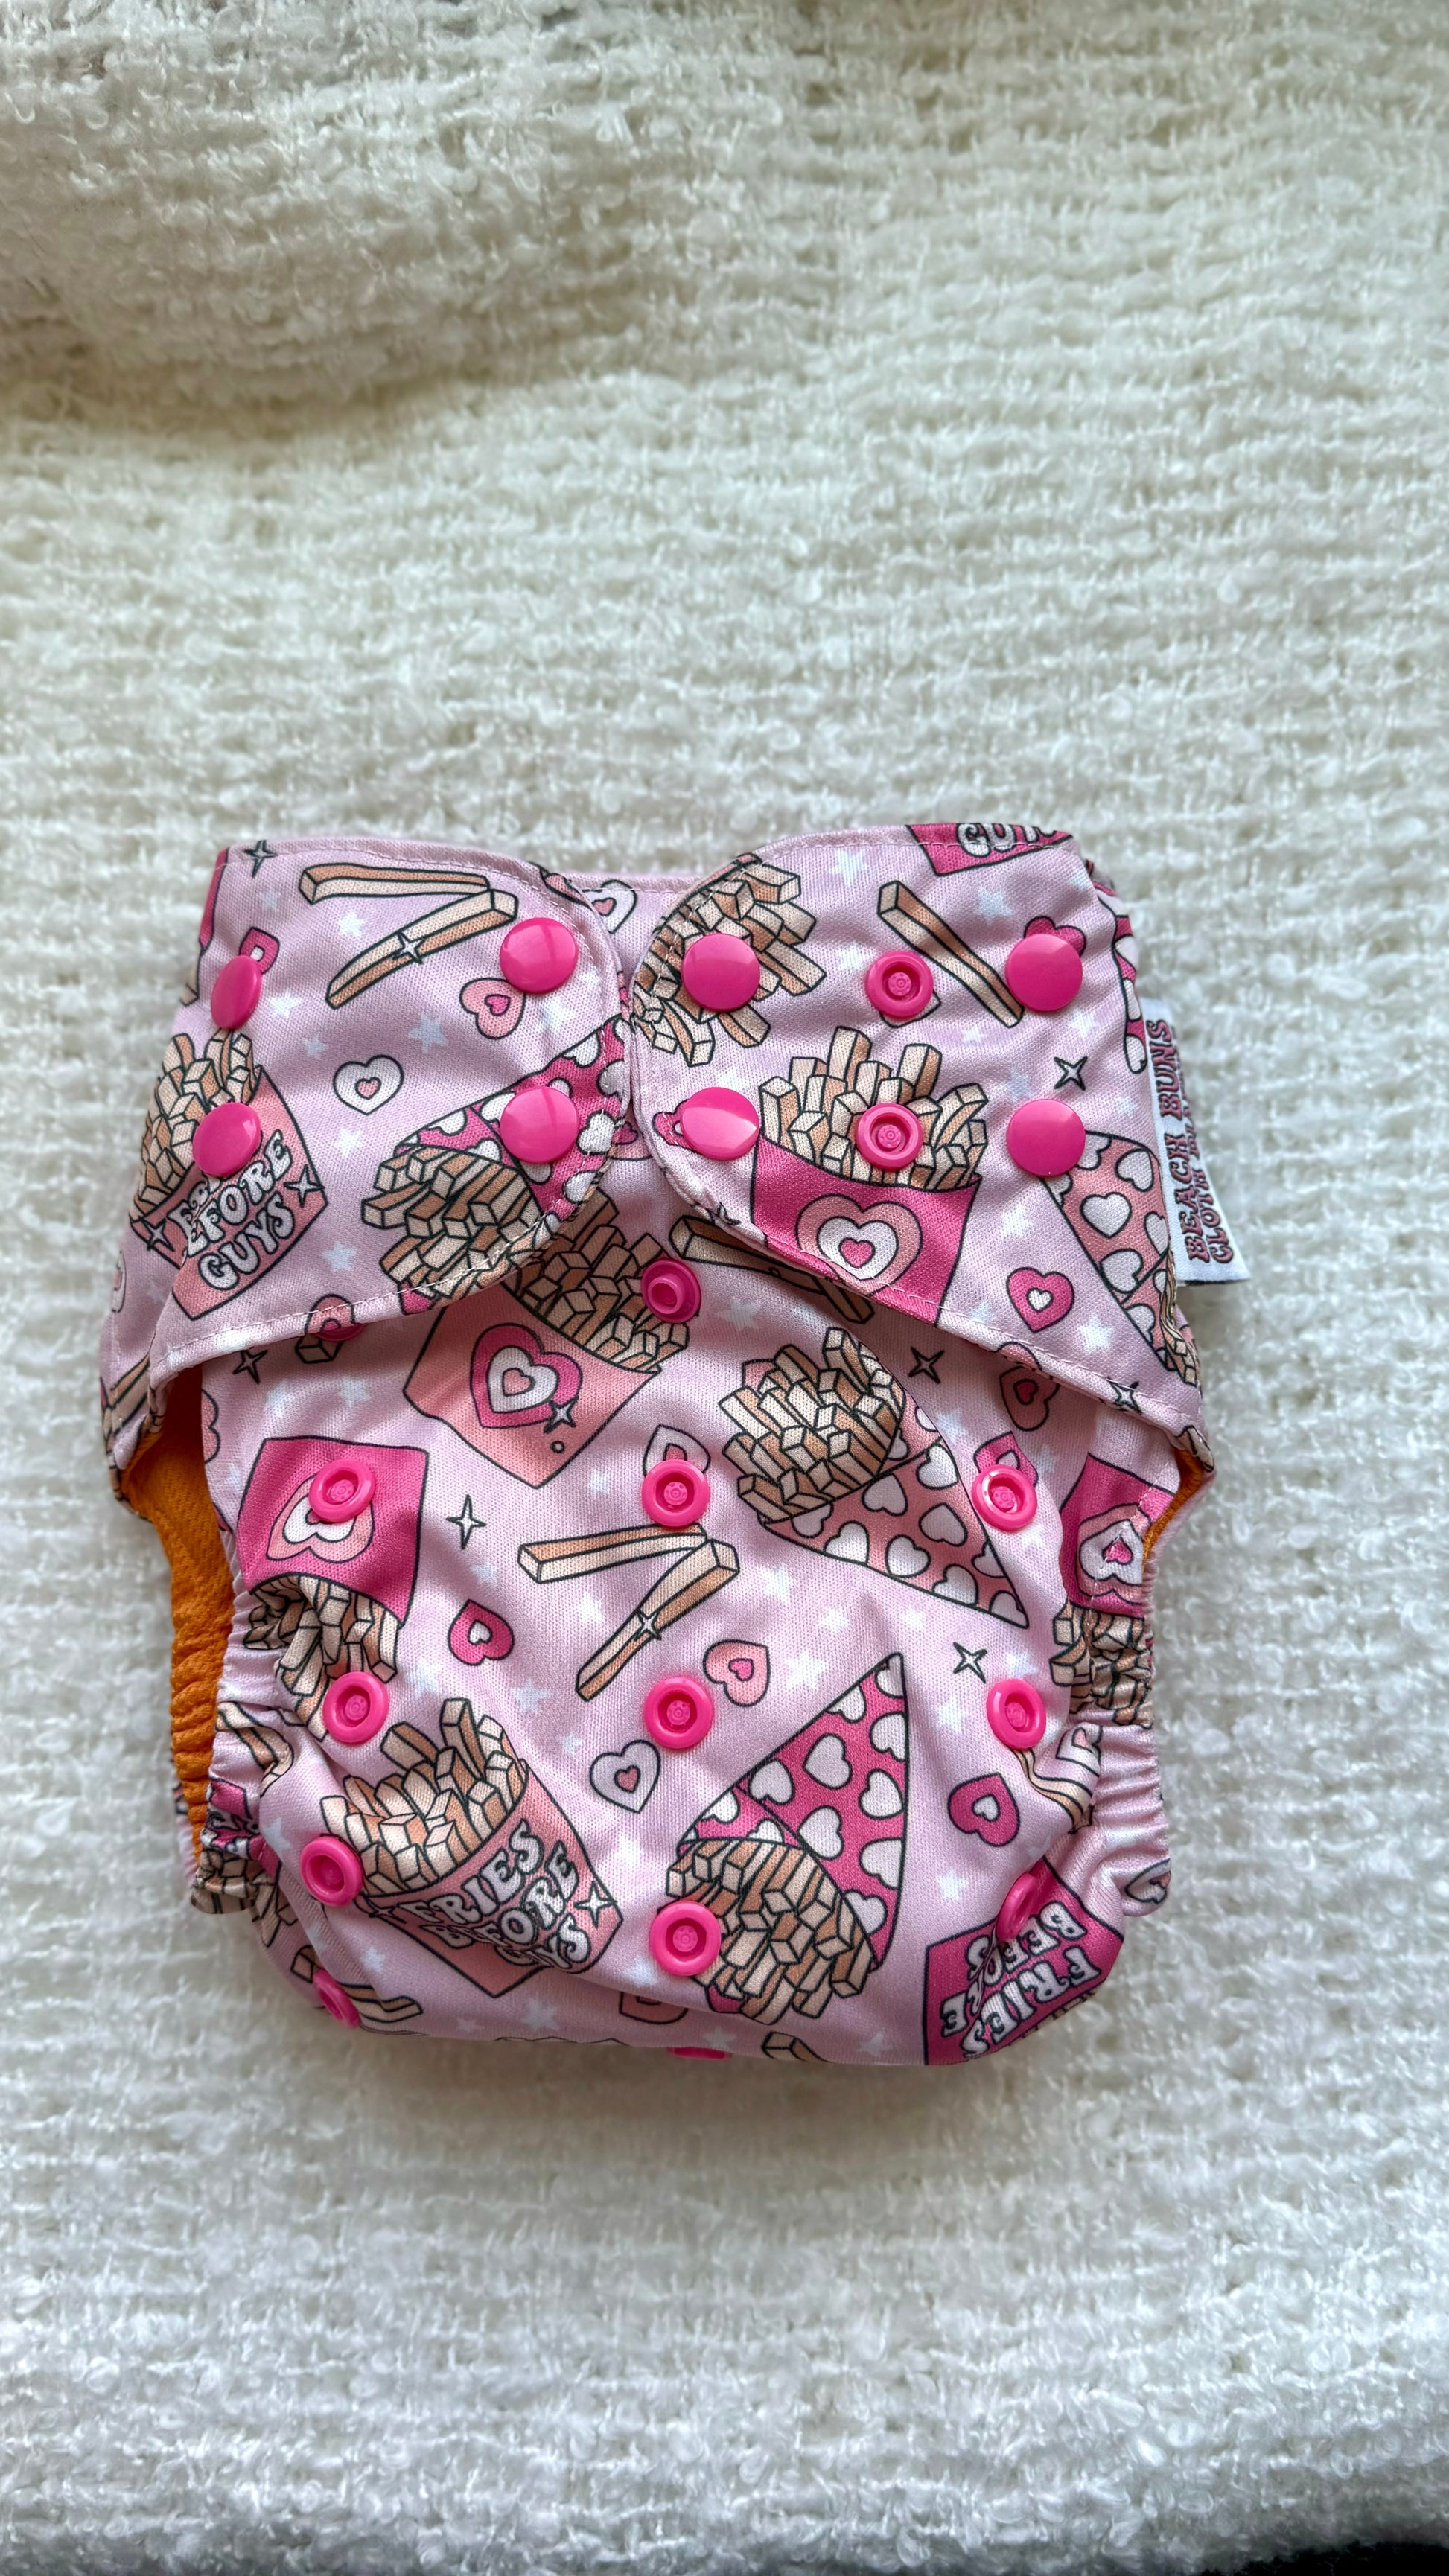 An assortment of colorful cloth diapers neatly stacked, showcasing a sustainable and eco-friendly diapering option for babies. The diapers display various vibrant patterns and soft fabrics, providing a reusable and comfortable solution for families.